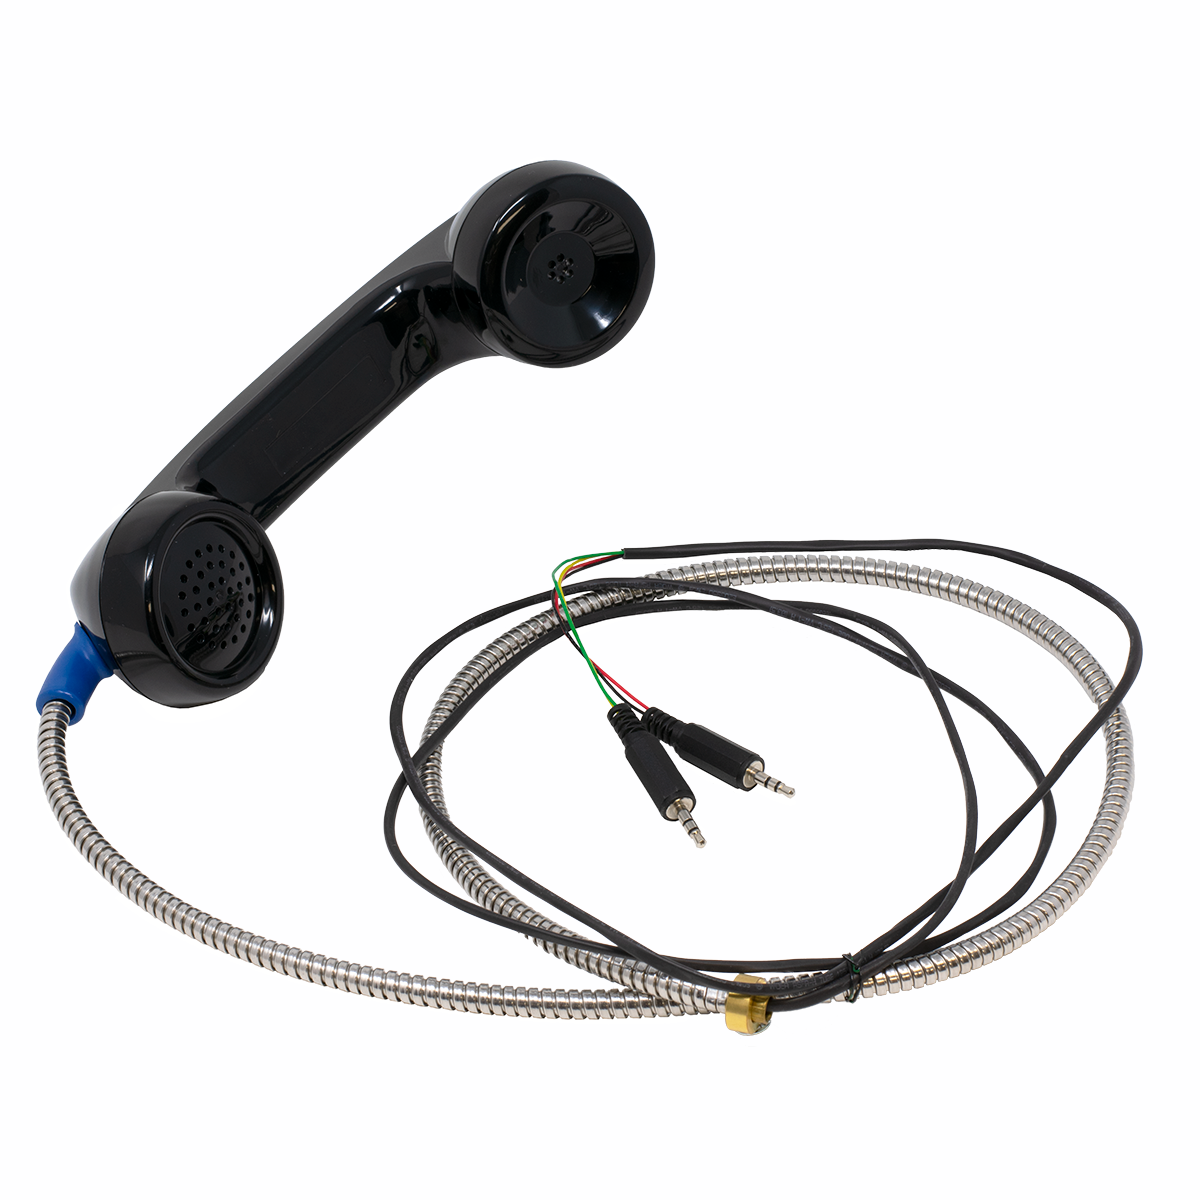 Lexan PC Handset with Armored Cord